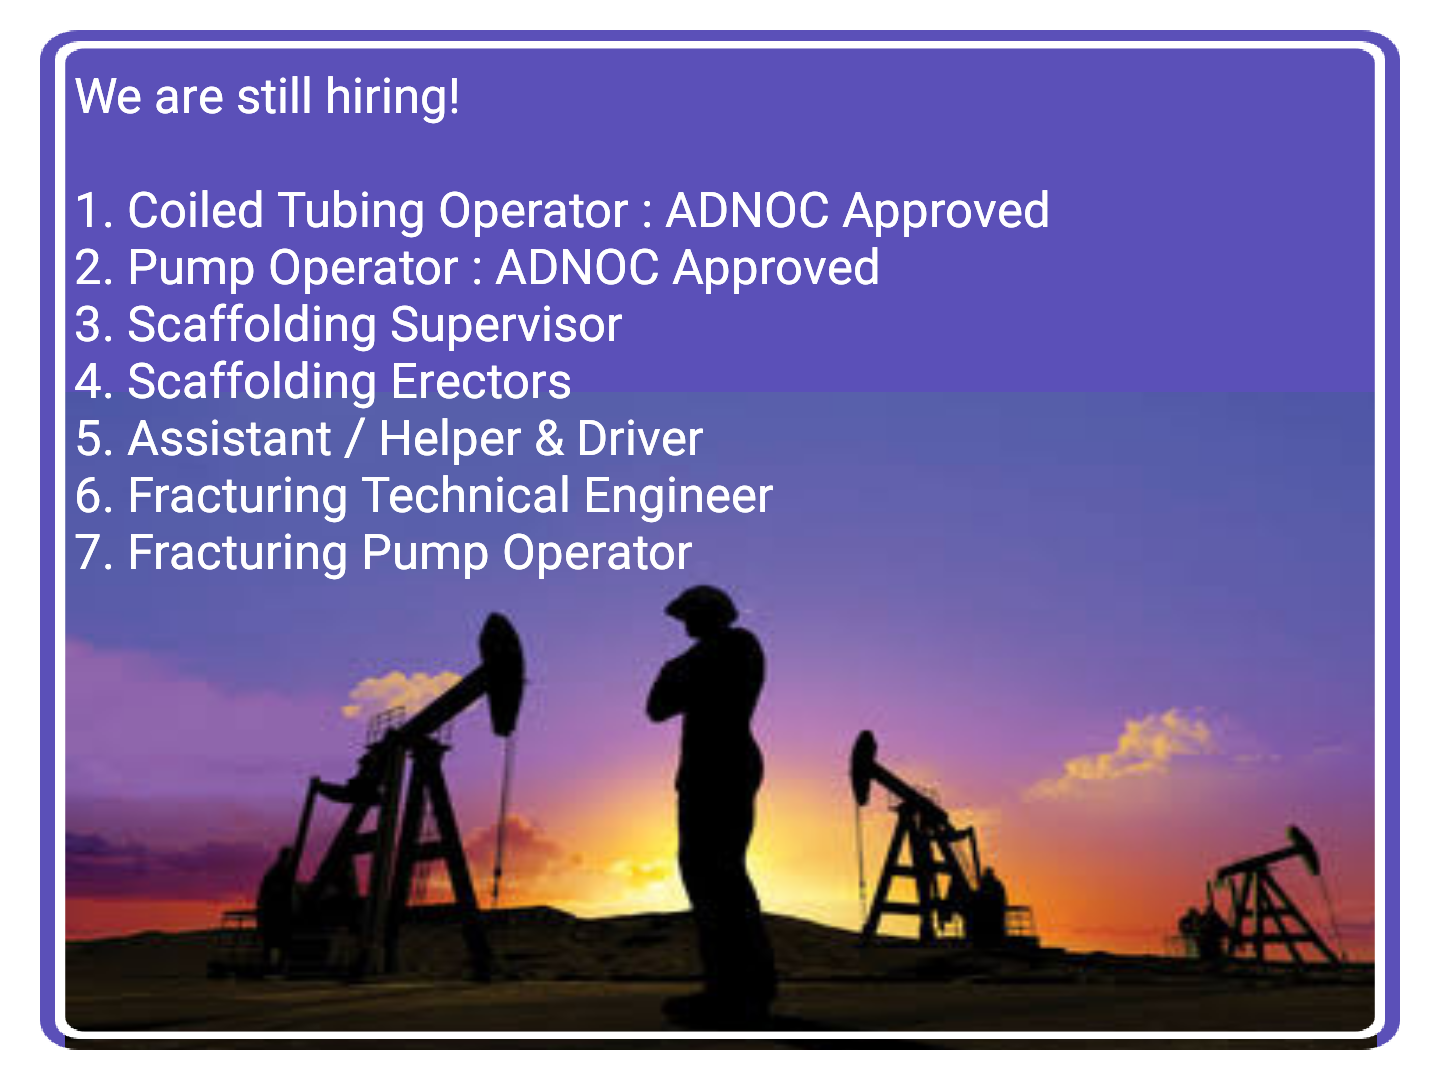 Coil Tubing, Pump Operator, Scaffolding & Fracturing Engineer Jobs